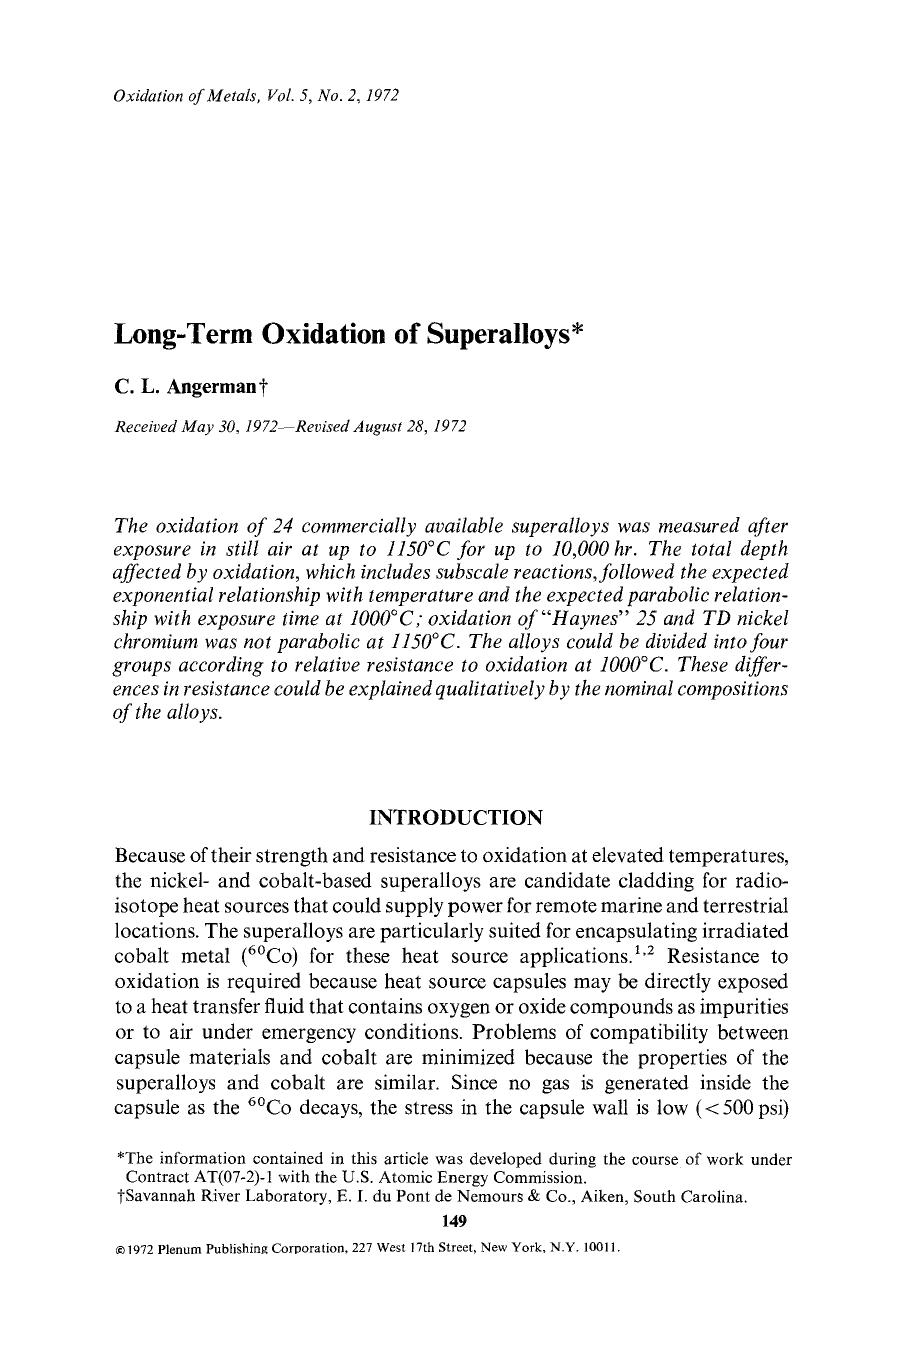 Long-term oxidation of superalloys by Unknown